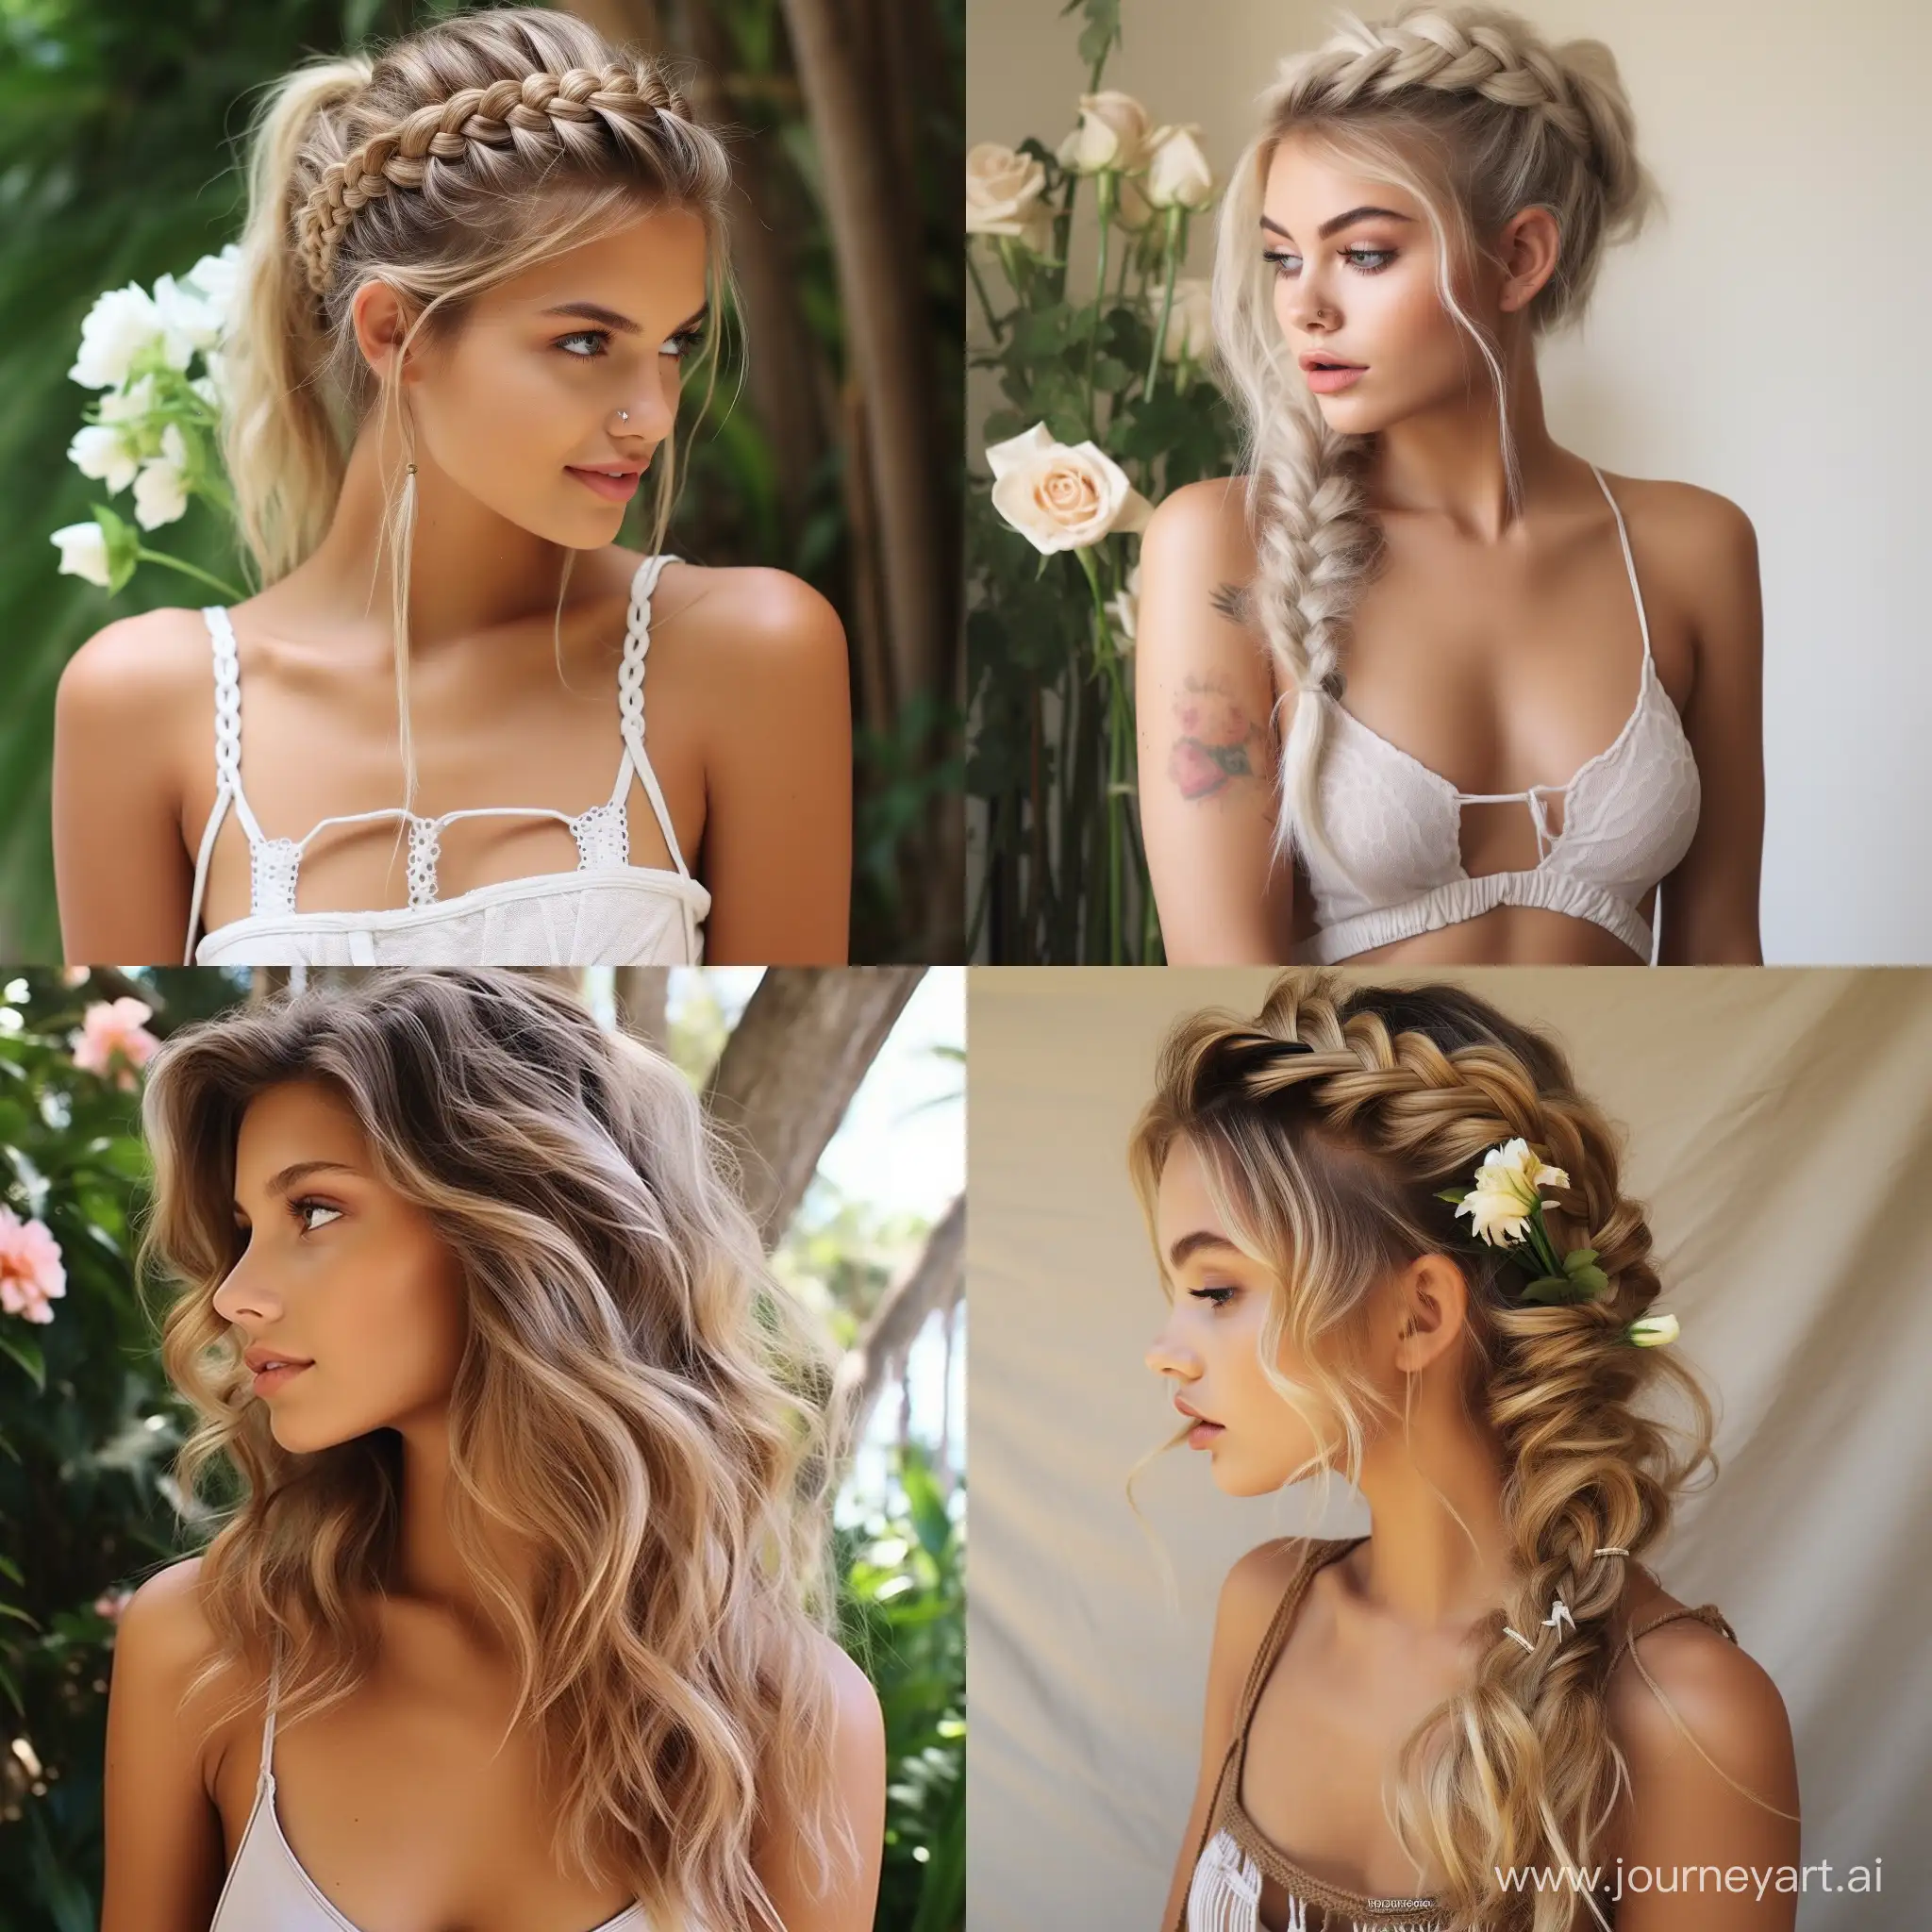 Chic-Summer-Hairstyles-for-Women-Trendy-Cuts-and-Styles-AR-11-Image-60991